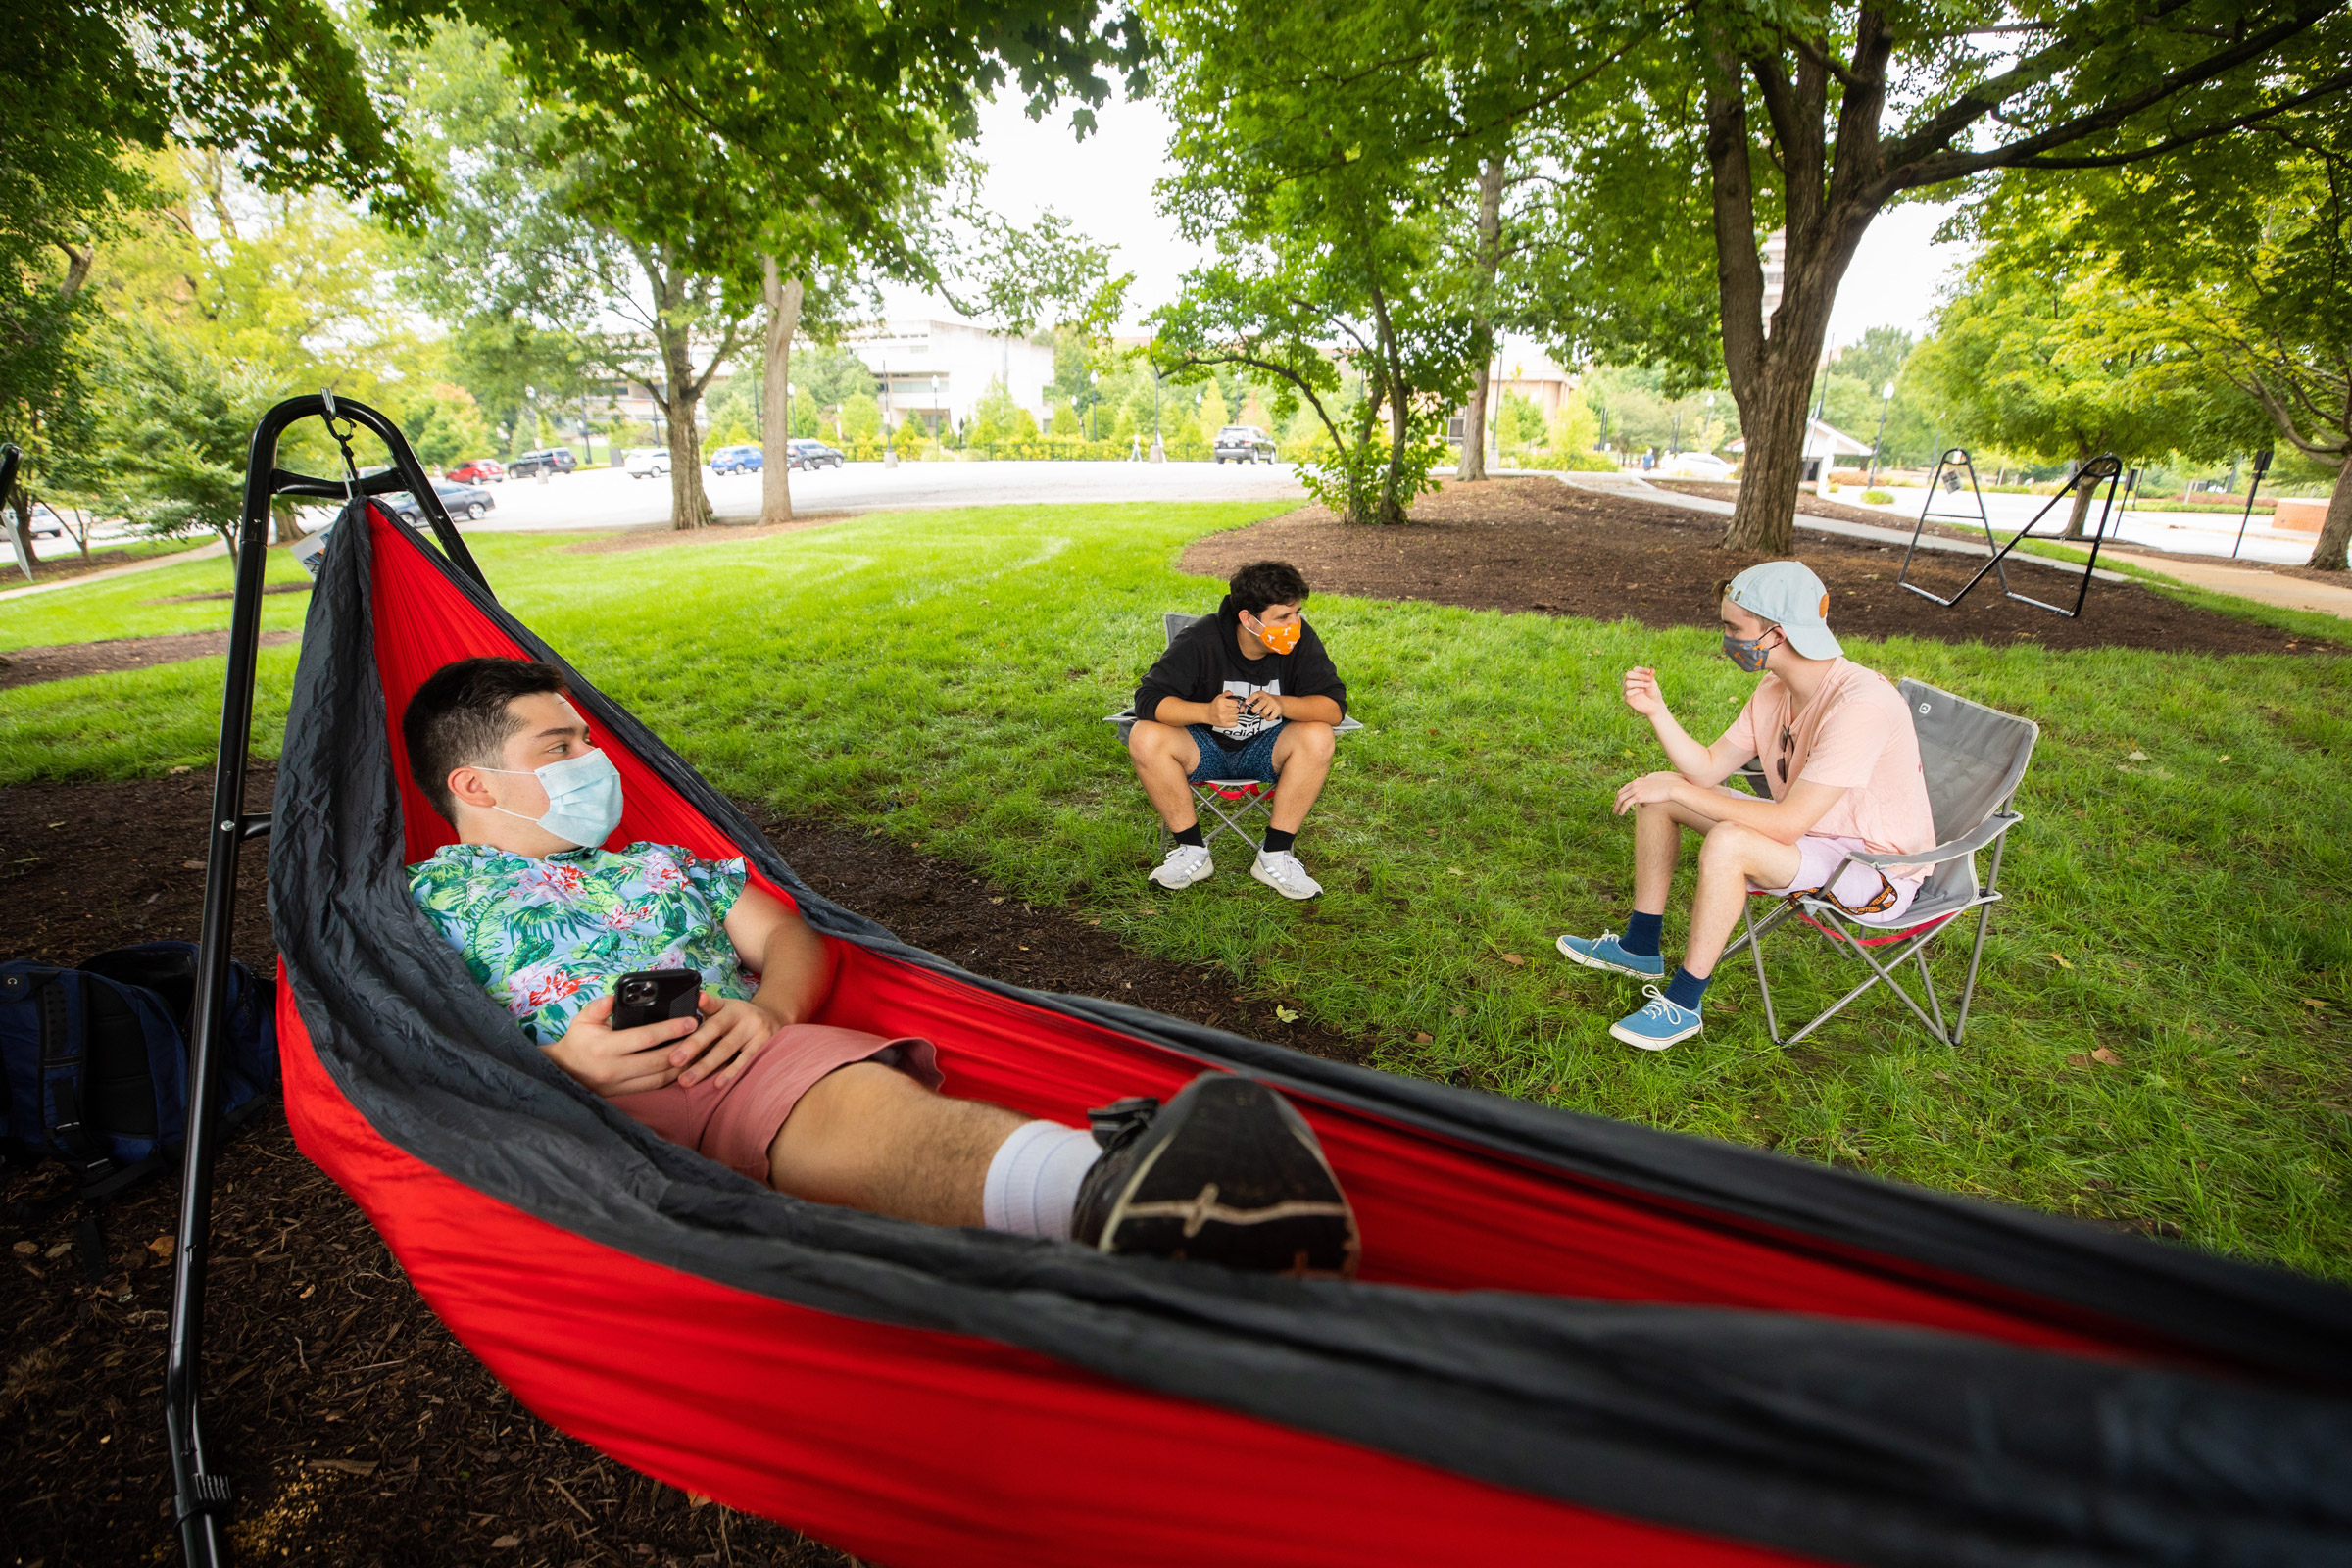 Three men chat outdoors in the shade wearing face masks. One is in a hammock and two are seated in lawn chairs.